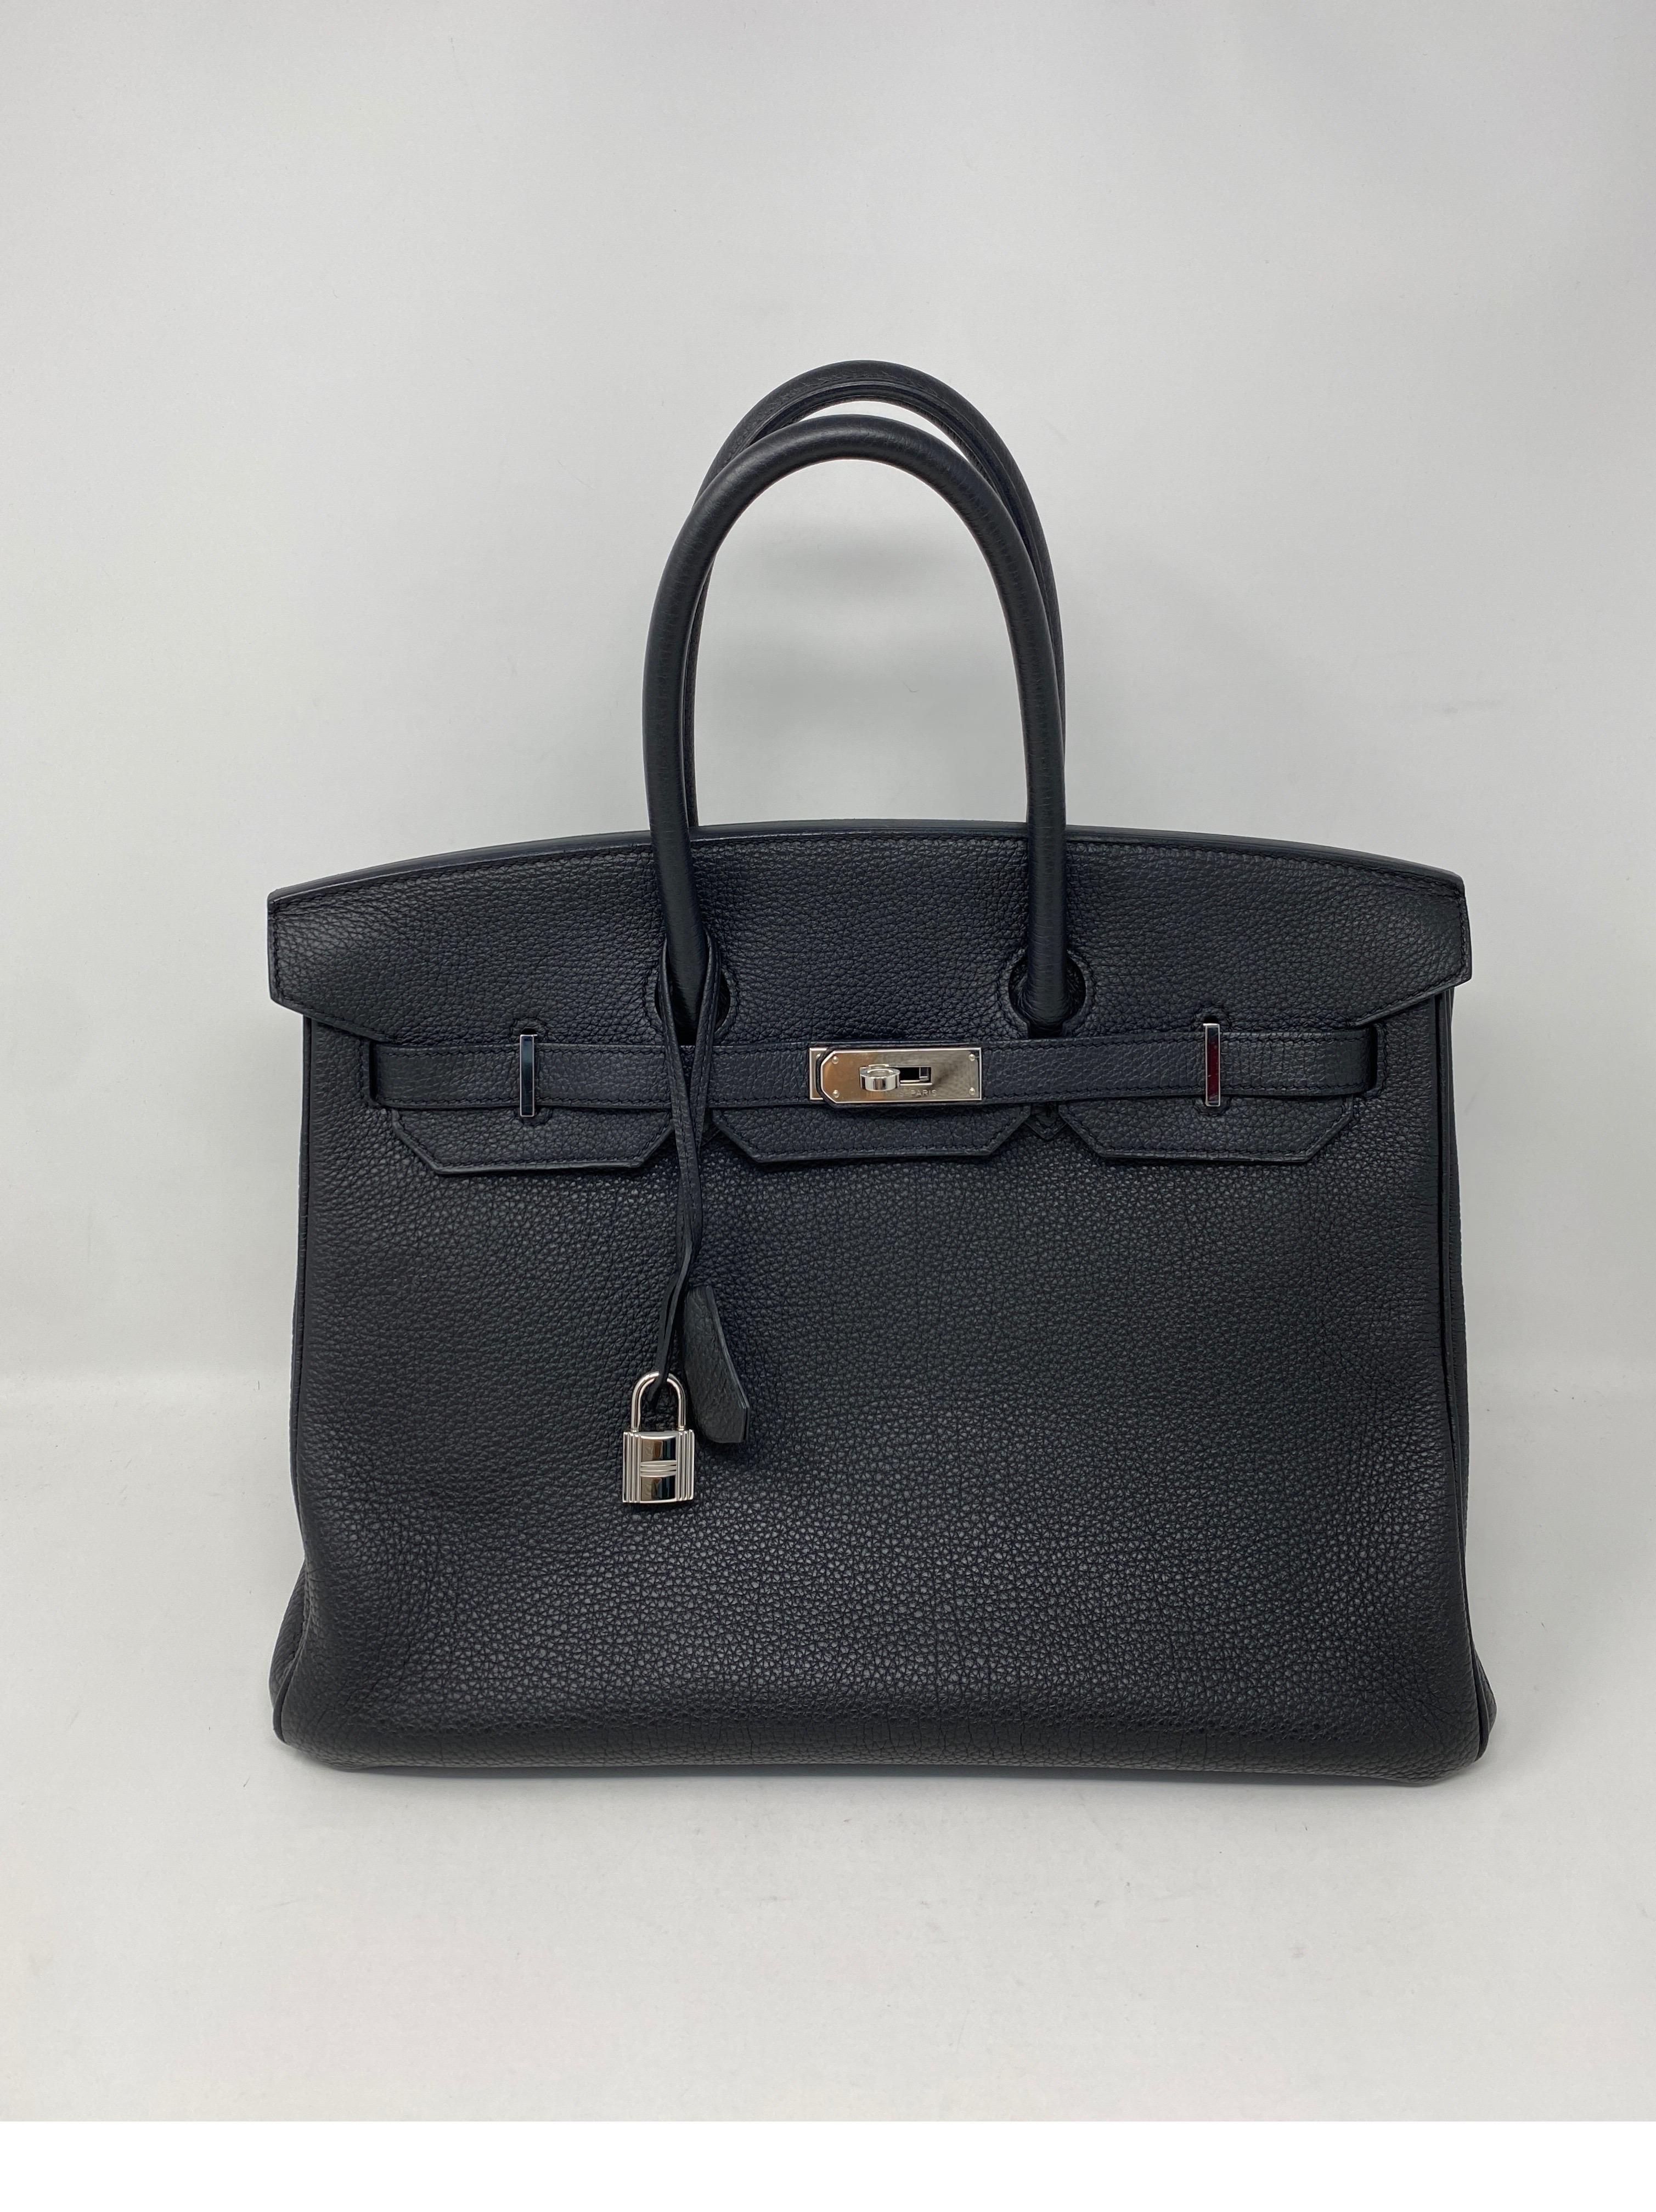 Hermes Black Birkin 35 Bag. Black togo leather with palladium hardware. Excellent condition. Classic most wanted black color. Includes clochette, lock, keys, dust cover and insert included. Light perfume scent interior. Clean throughout bag.